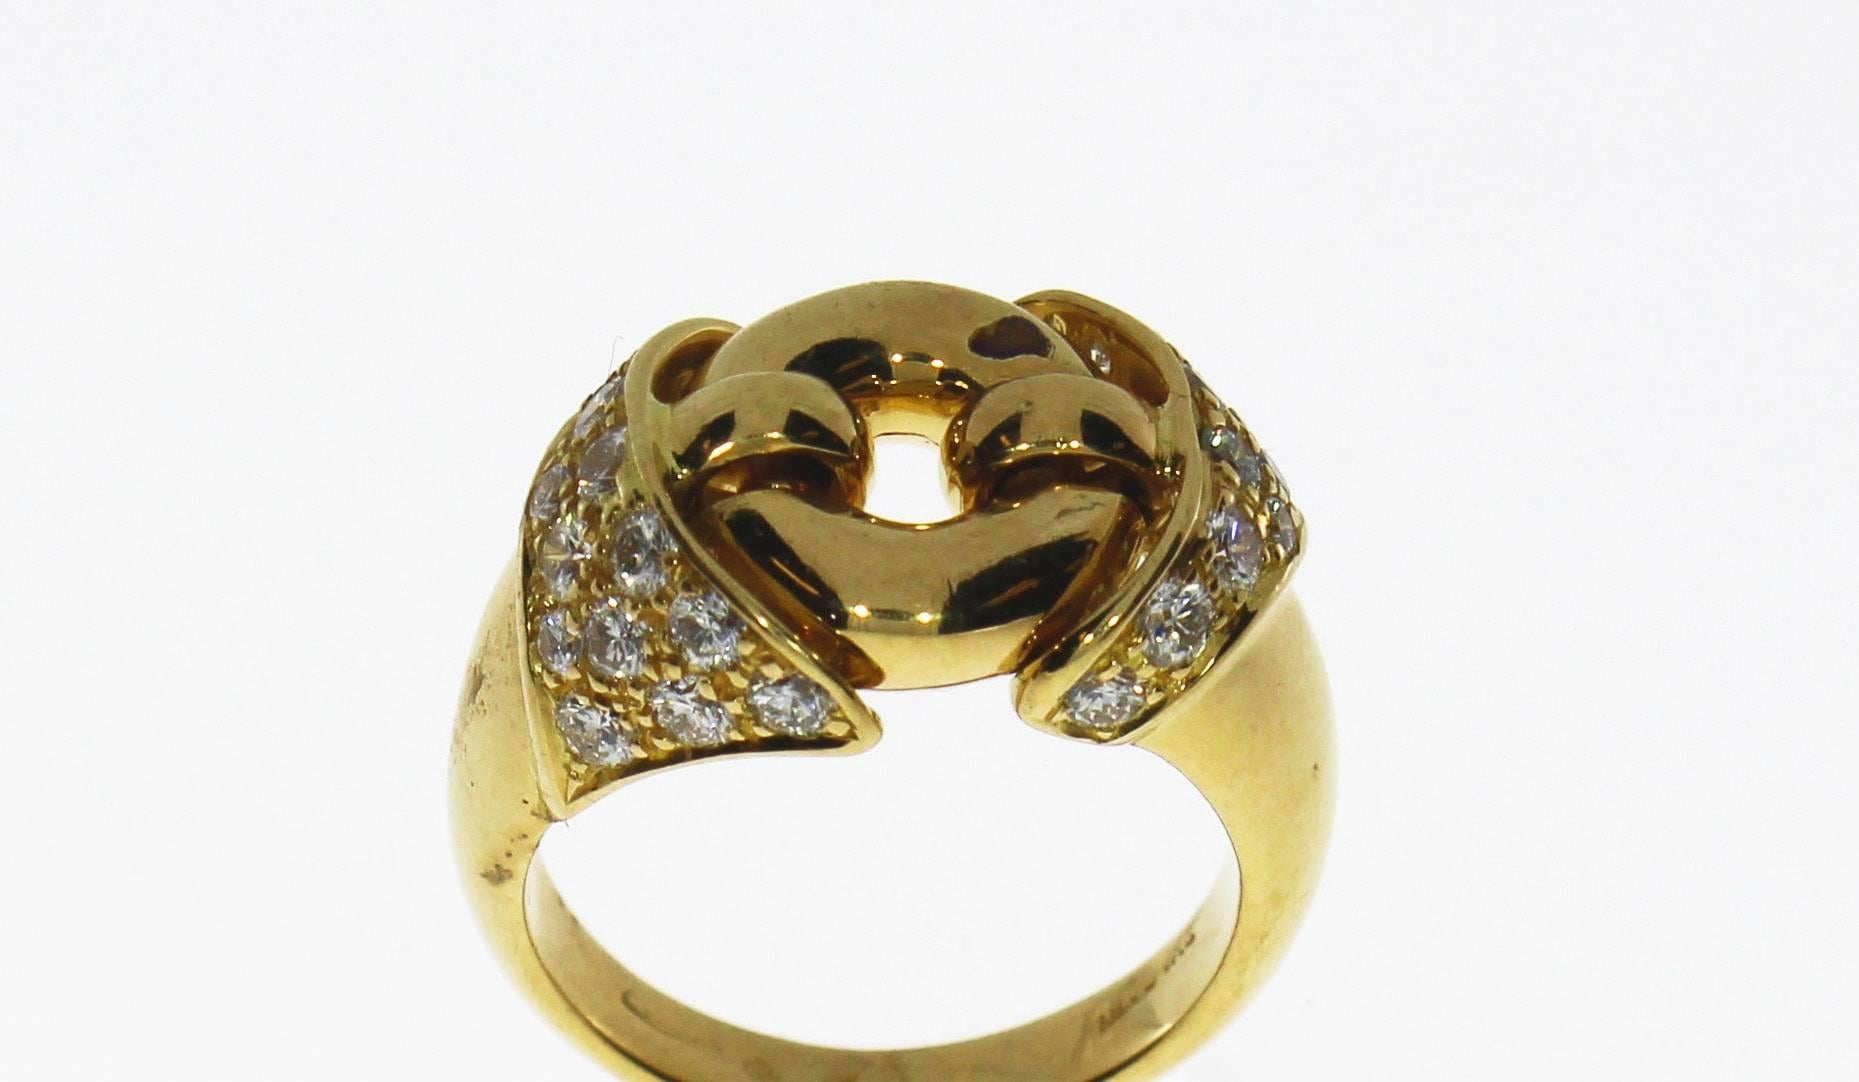 A 18K Yellow Gold and Colorless Diamond vintage Bulgari ring, with  approx 0.54 carat weight in diamonds.

Ring is a size 6 1/2. 